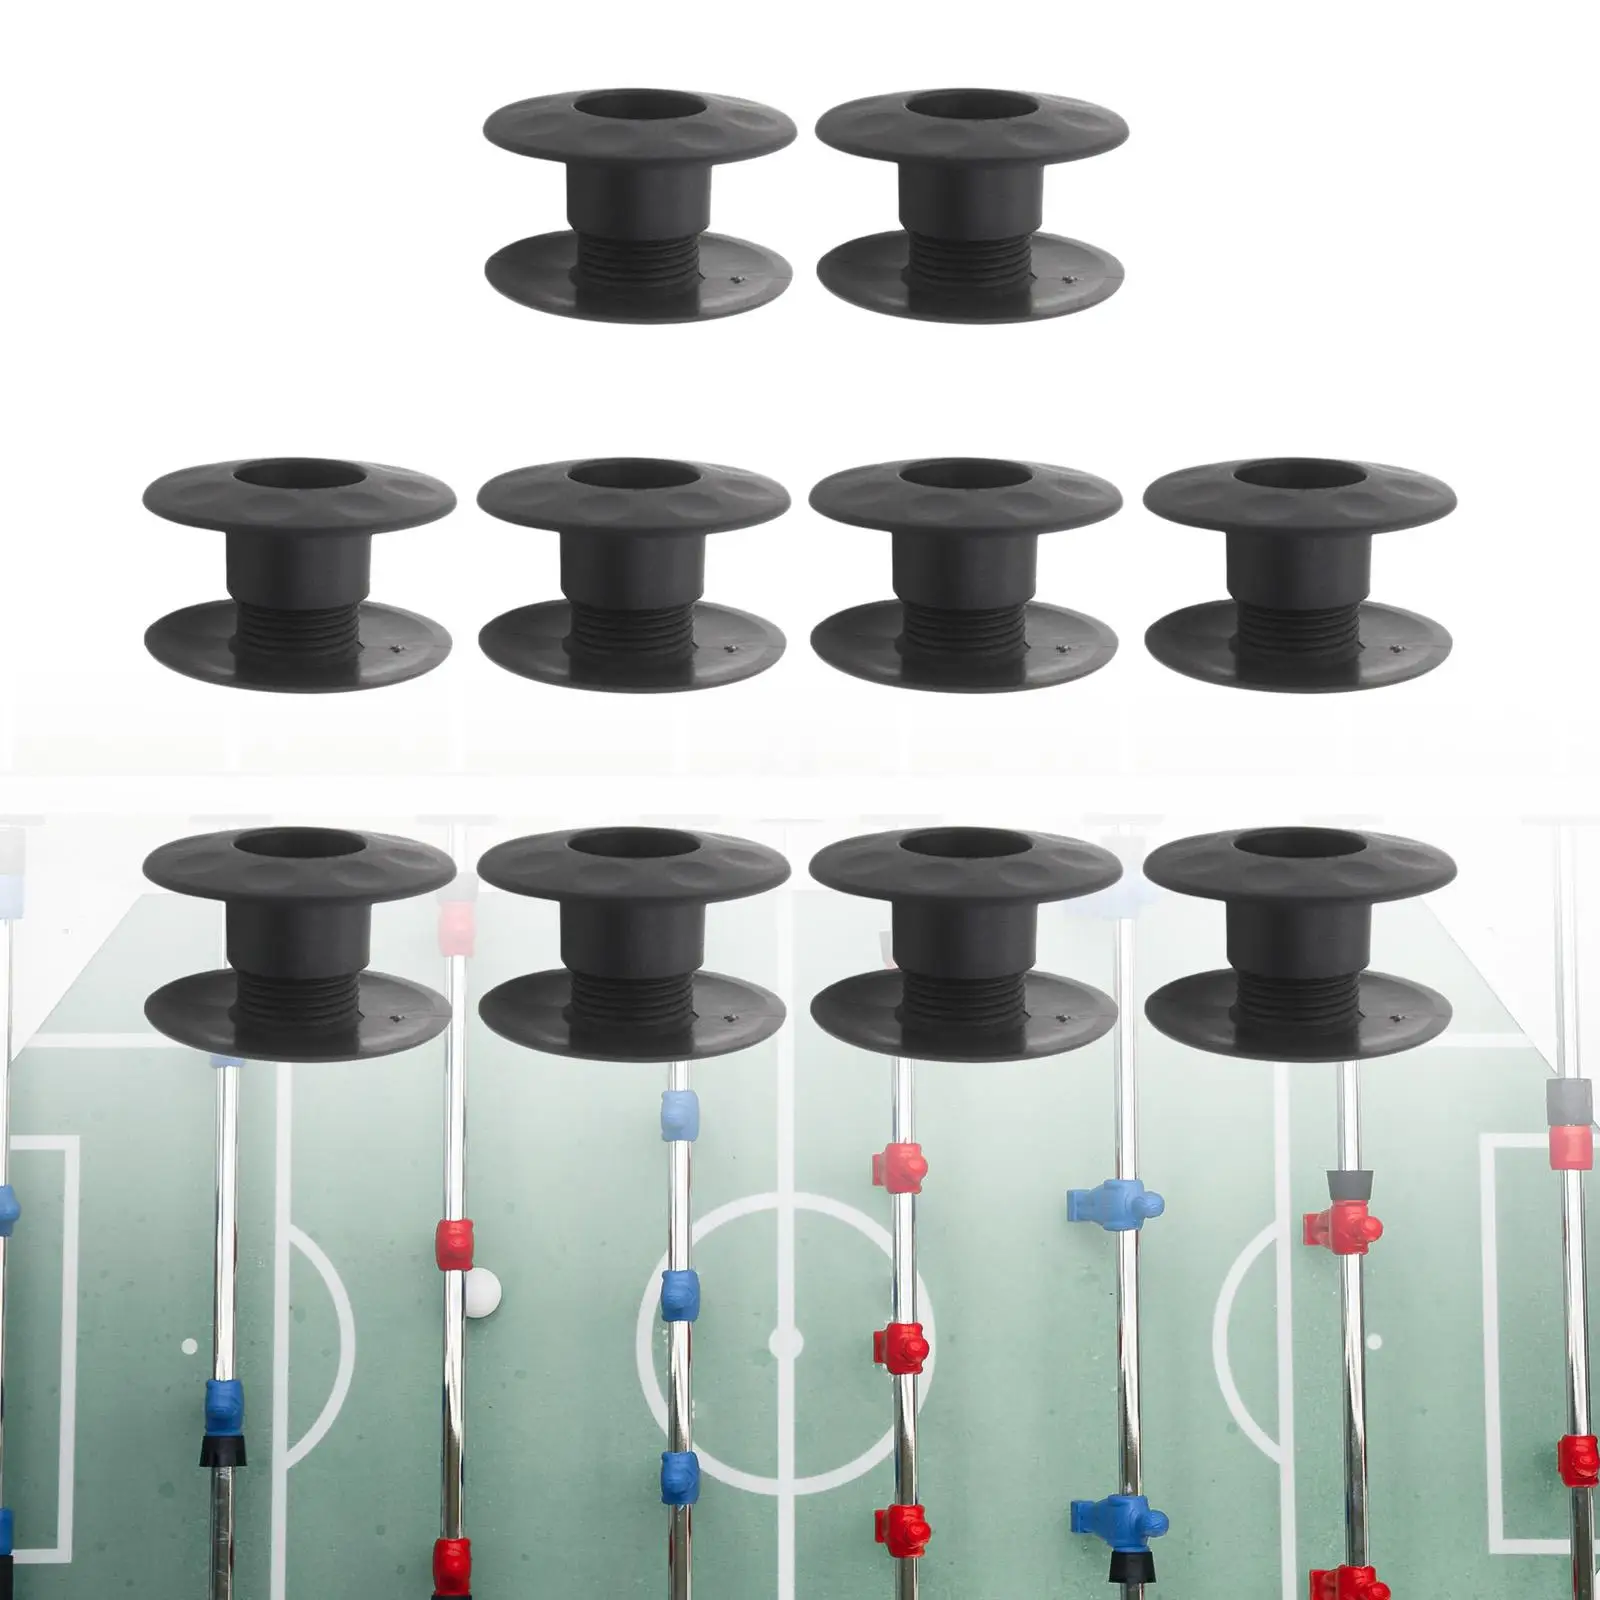 10Pcs Foosball Bearing Rods Threaded Structure for Standard Foosball Tables Soccer Games Durable Foosball Table Parts